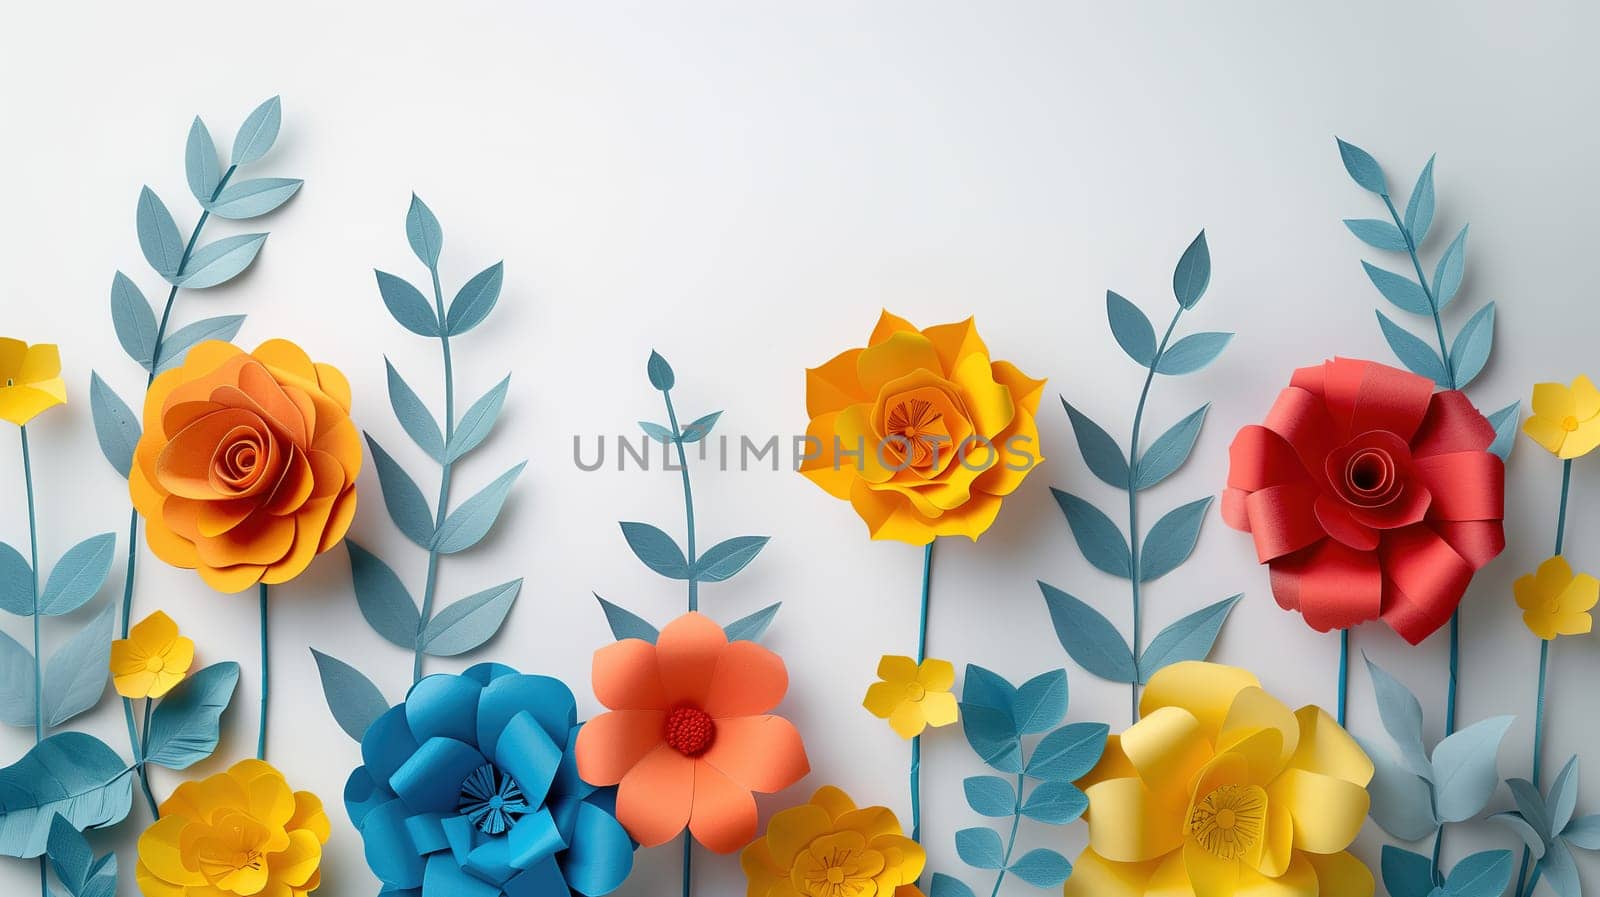 Group of Paper Flowers Adorning Wall by TRMK